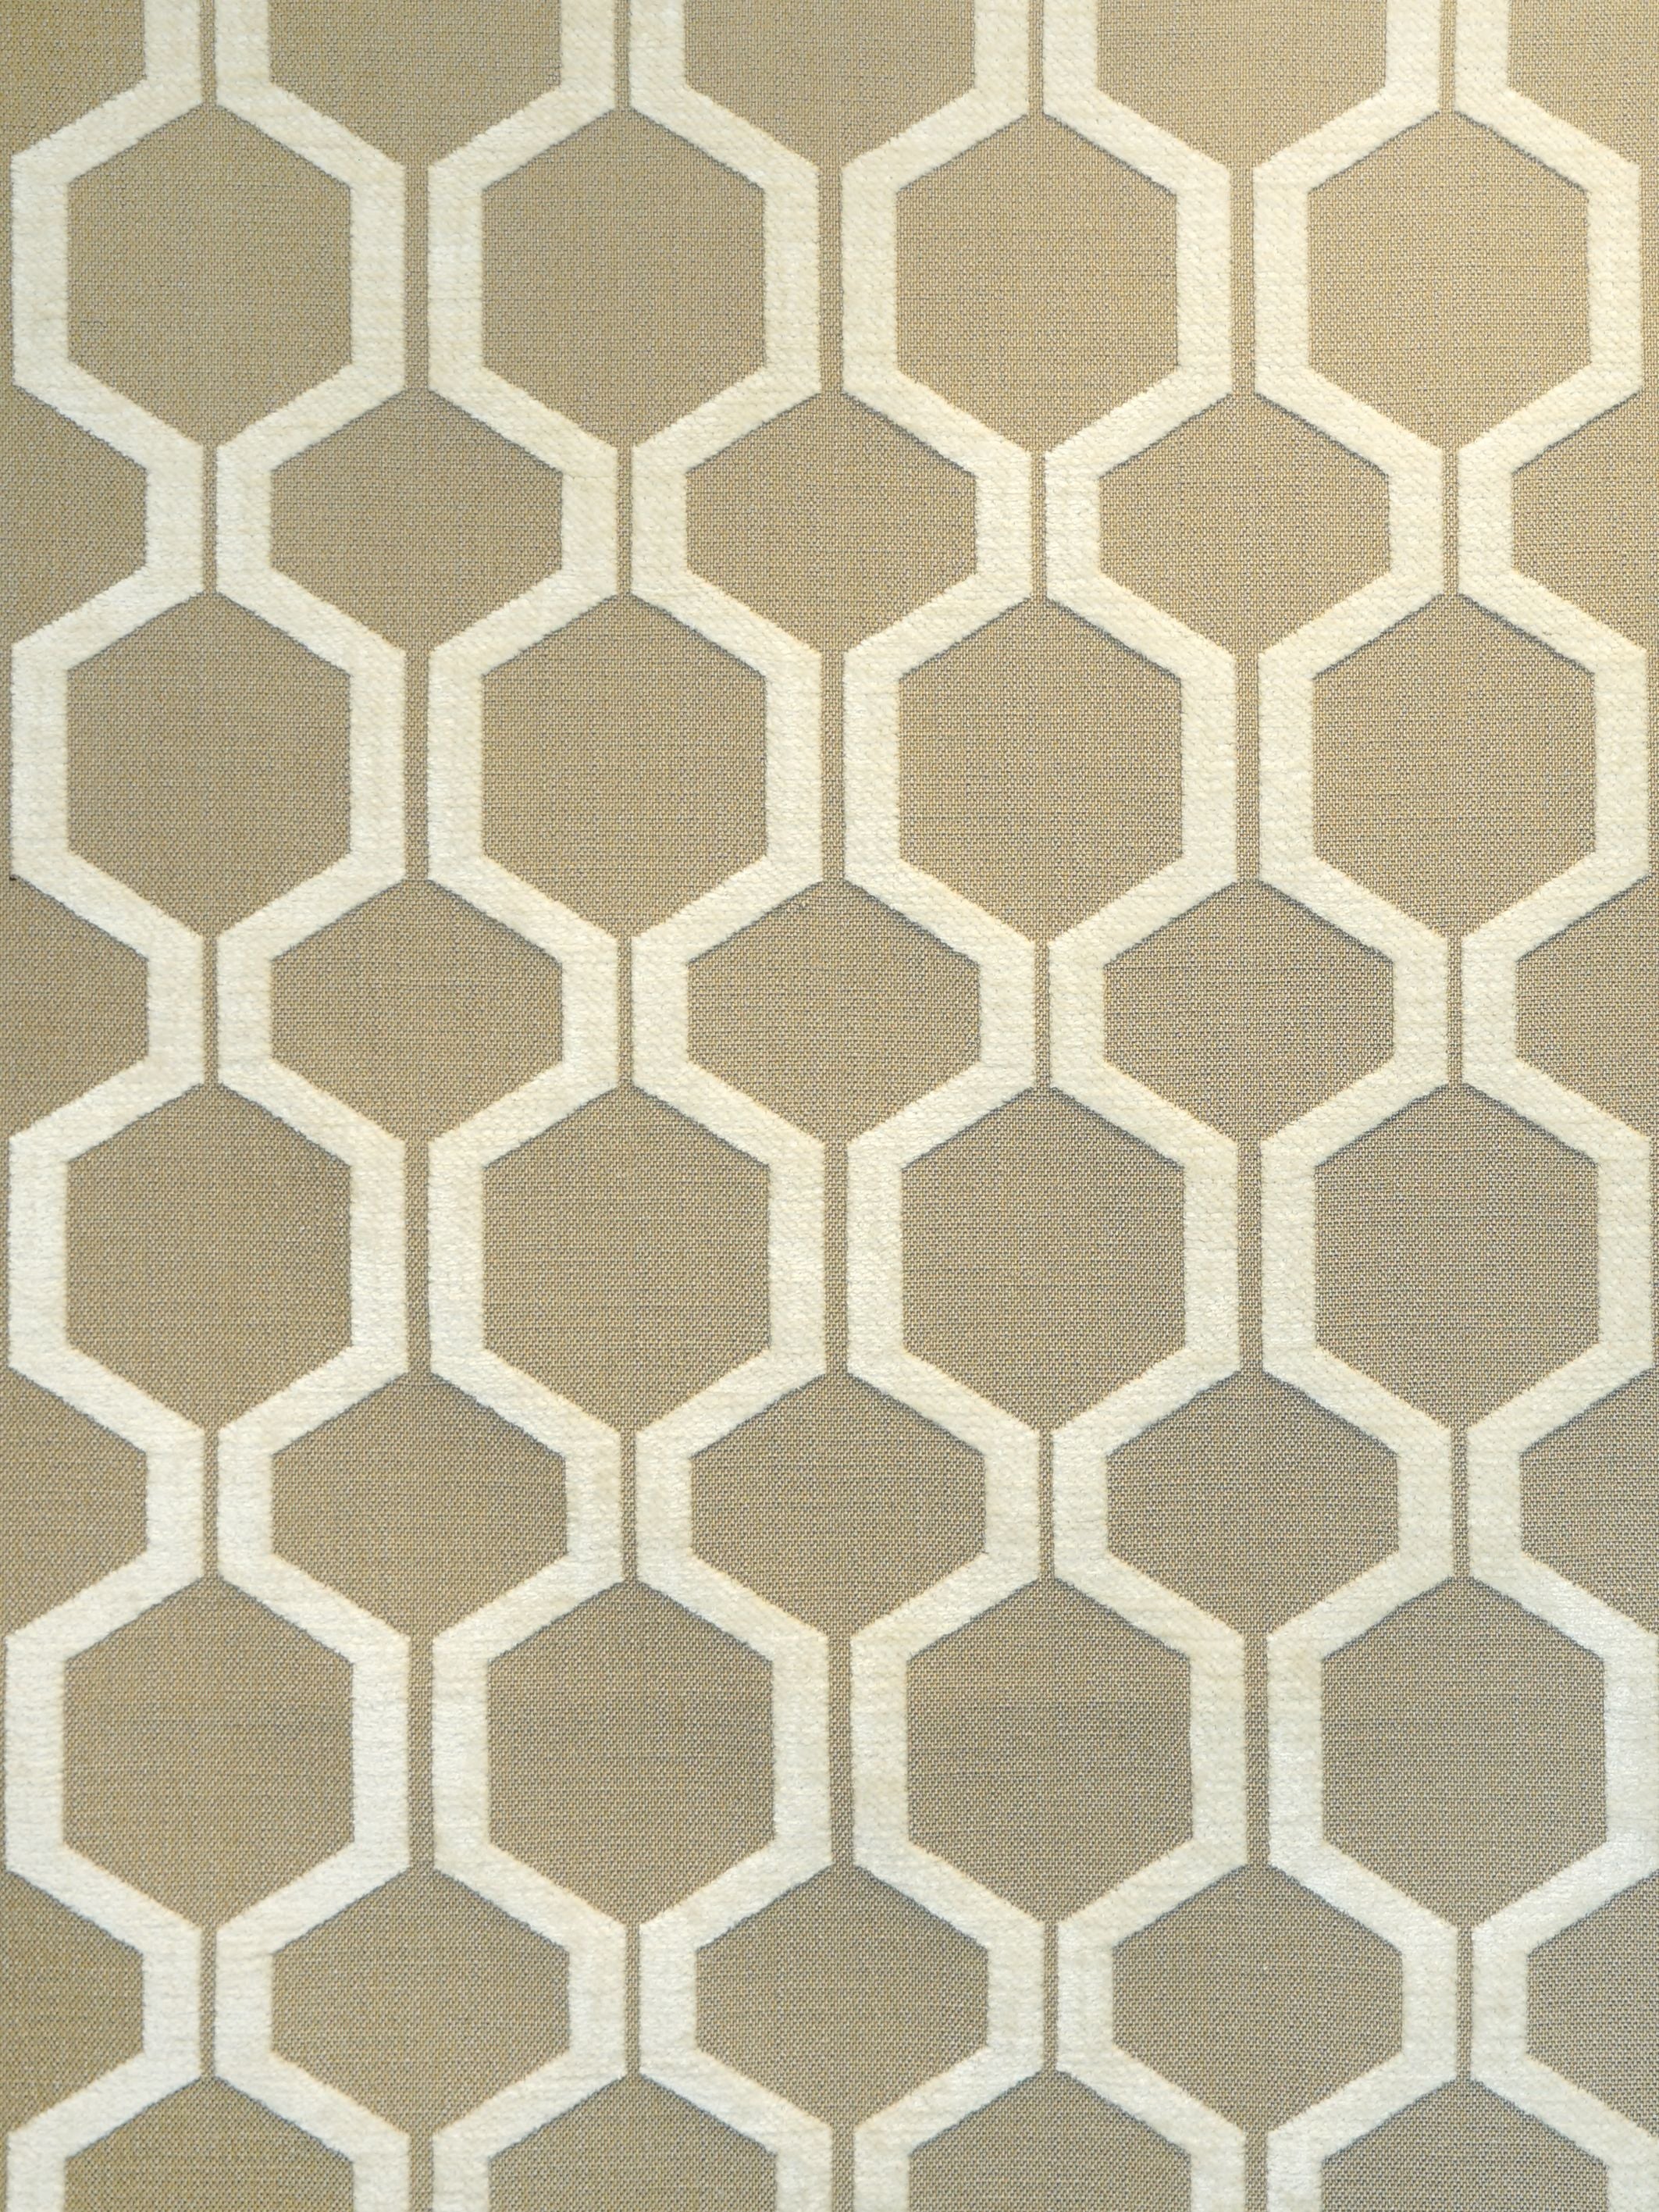 Hex fabric in cremini color - pattern number PN 9350P477 - by Scalamandre in the Old World Weavers collection